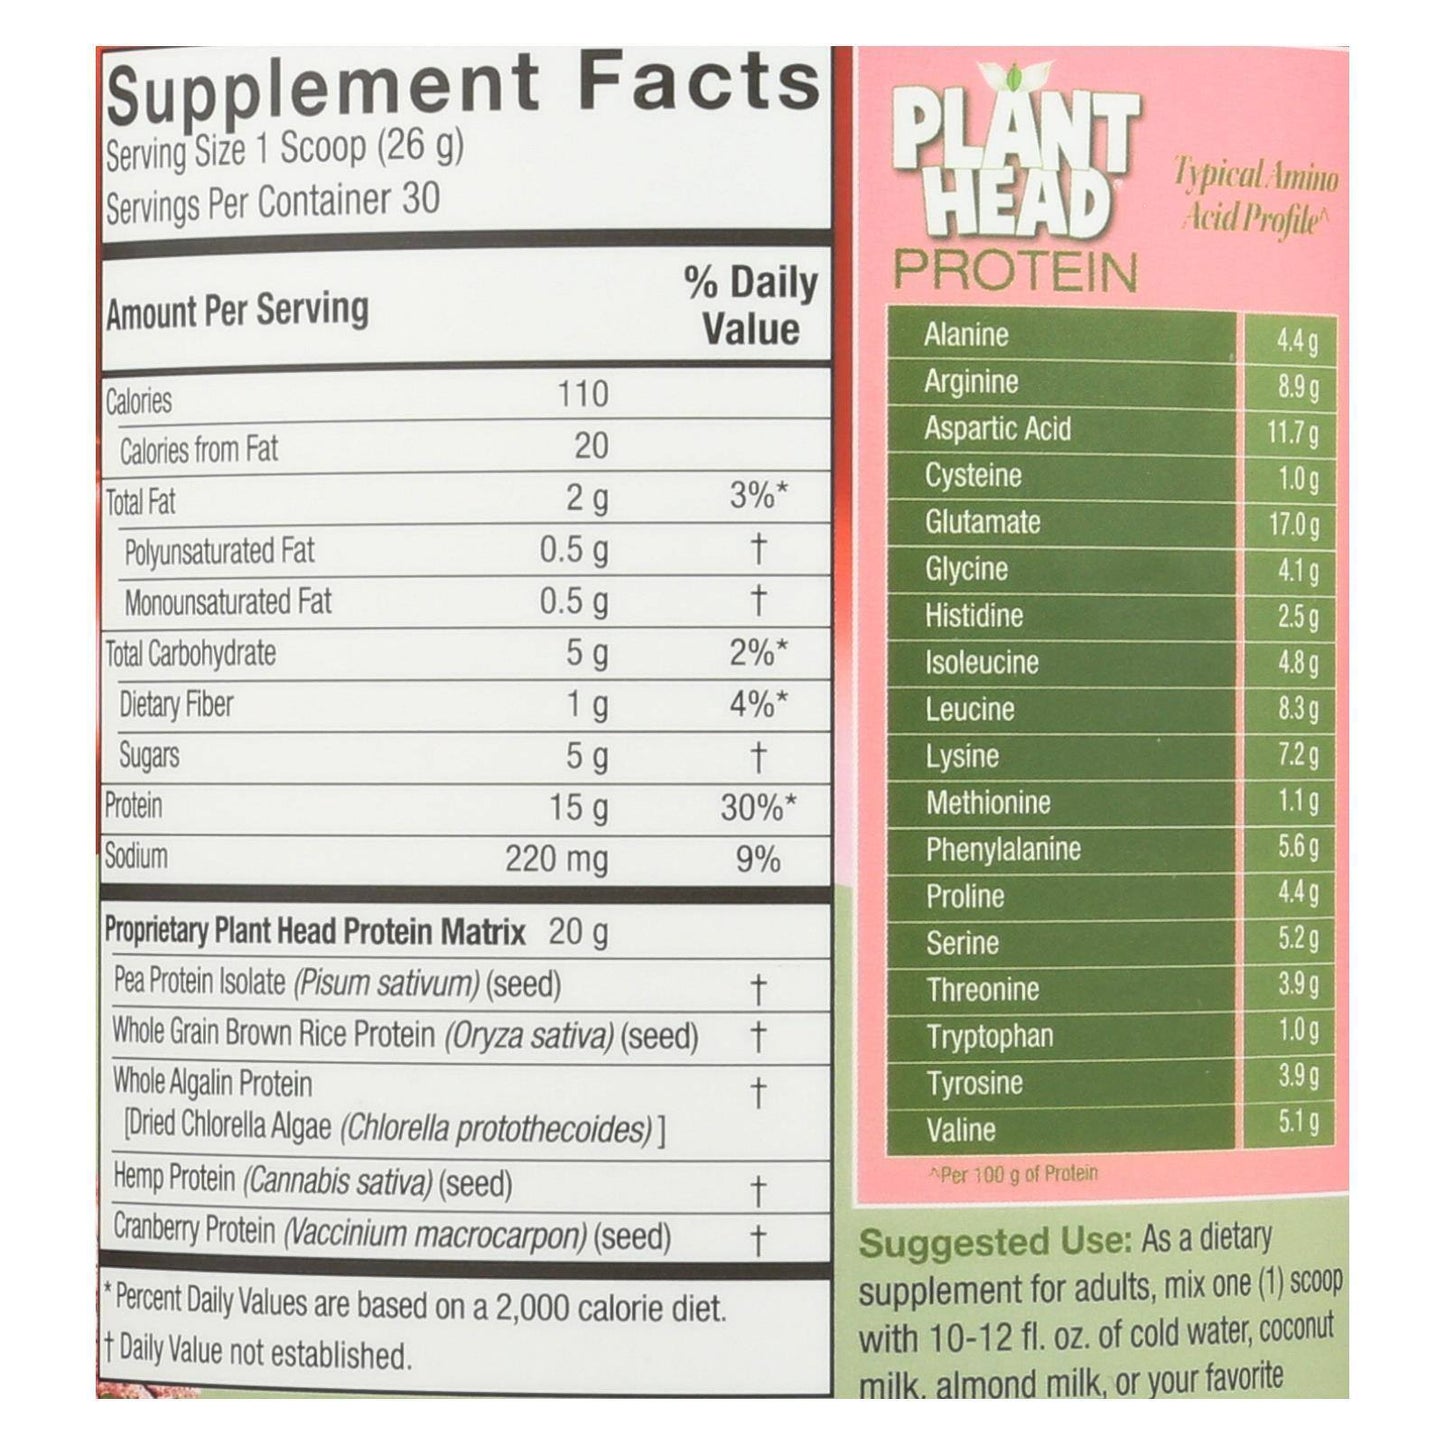 Genceutic Naturals Plant Head Protein - Strawberry - 1.7 lb